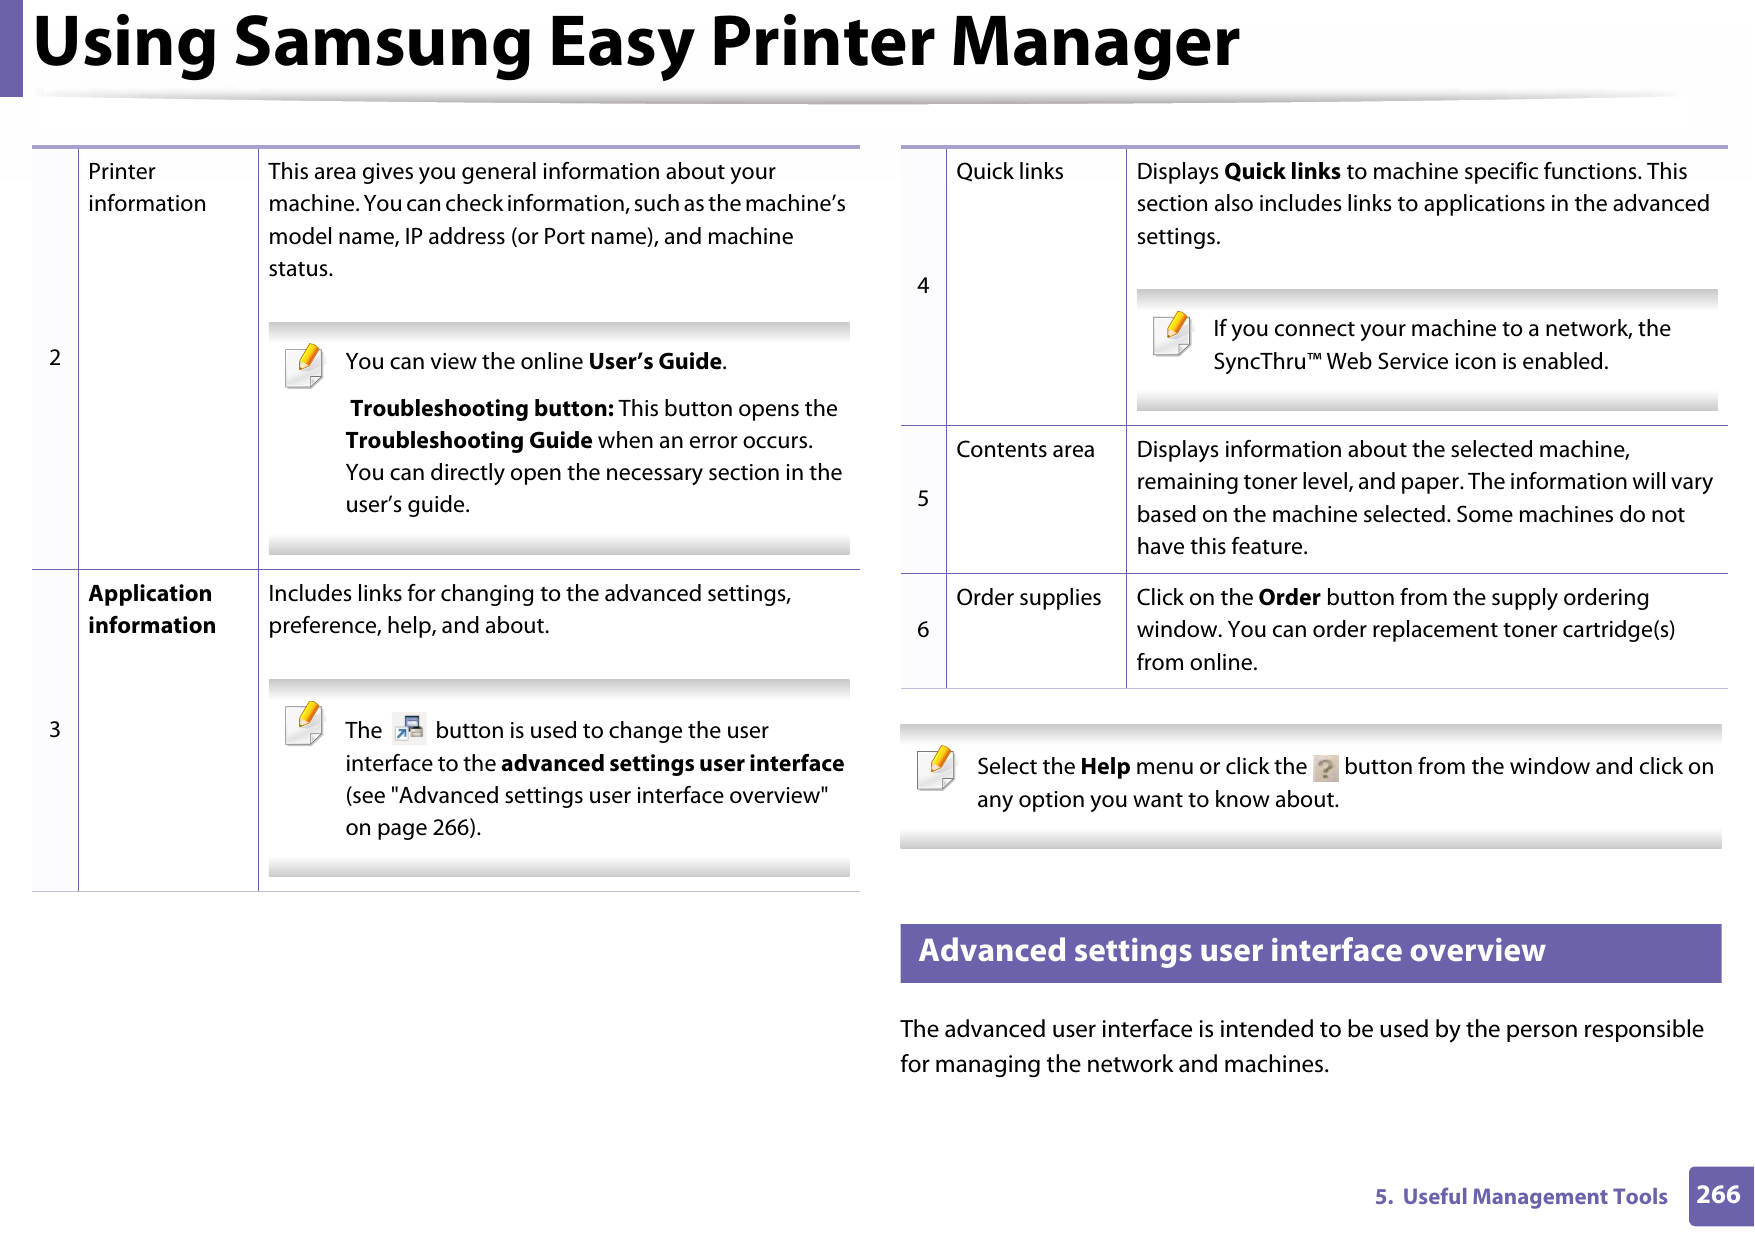 Using Samsung Easy Printer Manager2665.  Useful Management Tools Select the Help menu or click the   button from the window and click on any option you want to know about.  6 Advanced settings user interface overviewThe advanced user interface is intended to be used by the person responsible for managing the network and machines.2Printer informationThis area gives you general information about your machine. You can check information, such as the machine’s model name, IP address (or Port name), and machine status. You can view the online User’s Guide. Troubleshooting button: This button opens the Troubleshooting Guide when an error occurs. You can directly open the necessary section in the user’s guide.  3Application informationIncludes links for changing to the advanced settings, preference, help, and about. The   button is used to change the user interface to the advanced settings user interface (see &quot;Advanced settings user interface overview&quot; on page 266). 4Quick links Displays Quick links to machine specific functions. This section also includes links to applications in the advanced settings. If you connect your machine to a network, the SyncThru™ Web Service icon is enabled. 5Contents area Displays information about the selected machine, remaining toner level, and paper. The information will vary based on the machine selected. Some machines do not have this feature.6Order supplies Click on the Order button from the supply ordering window. You can order replacement toner cartridge(s) from online.